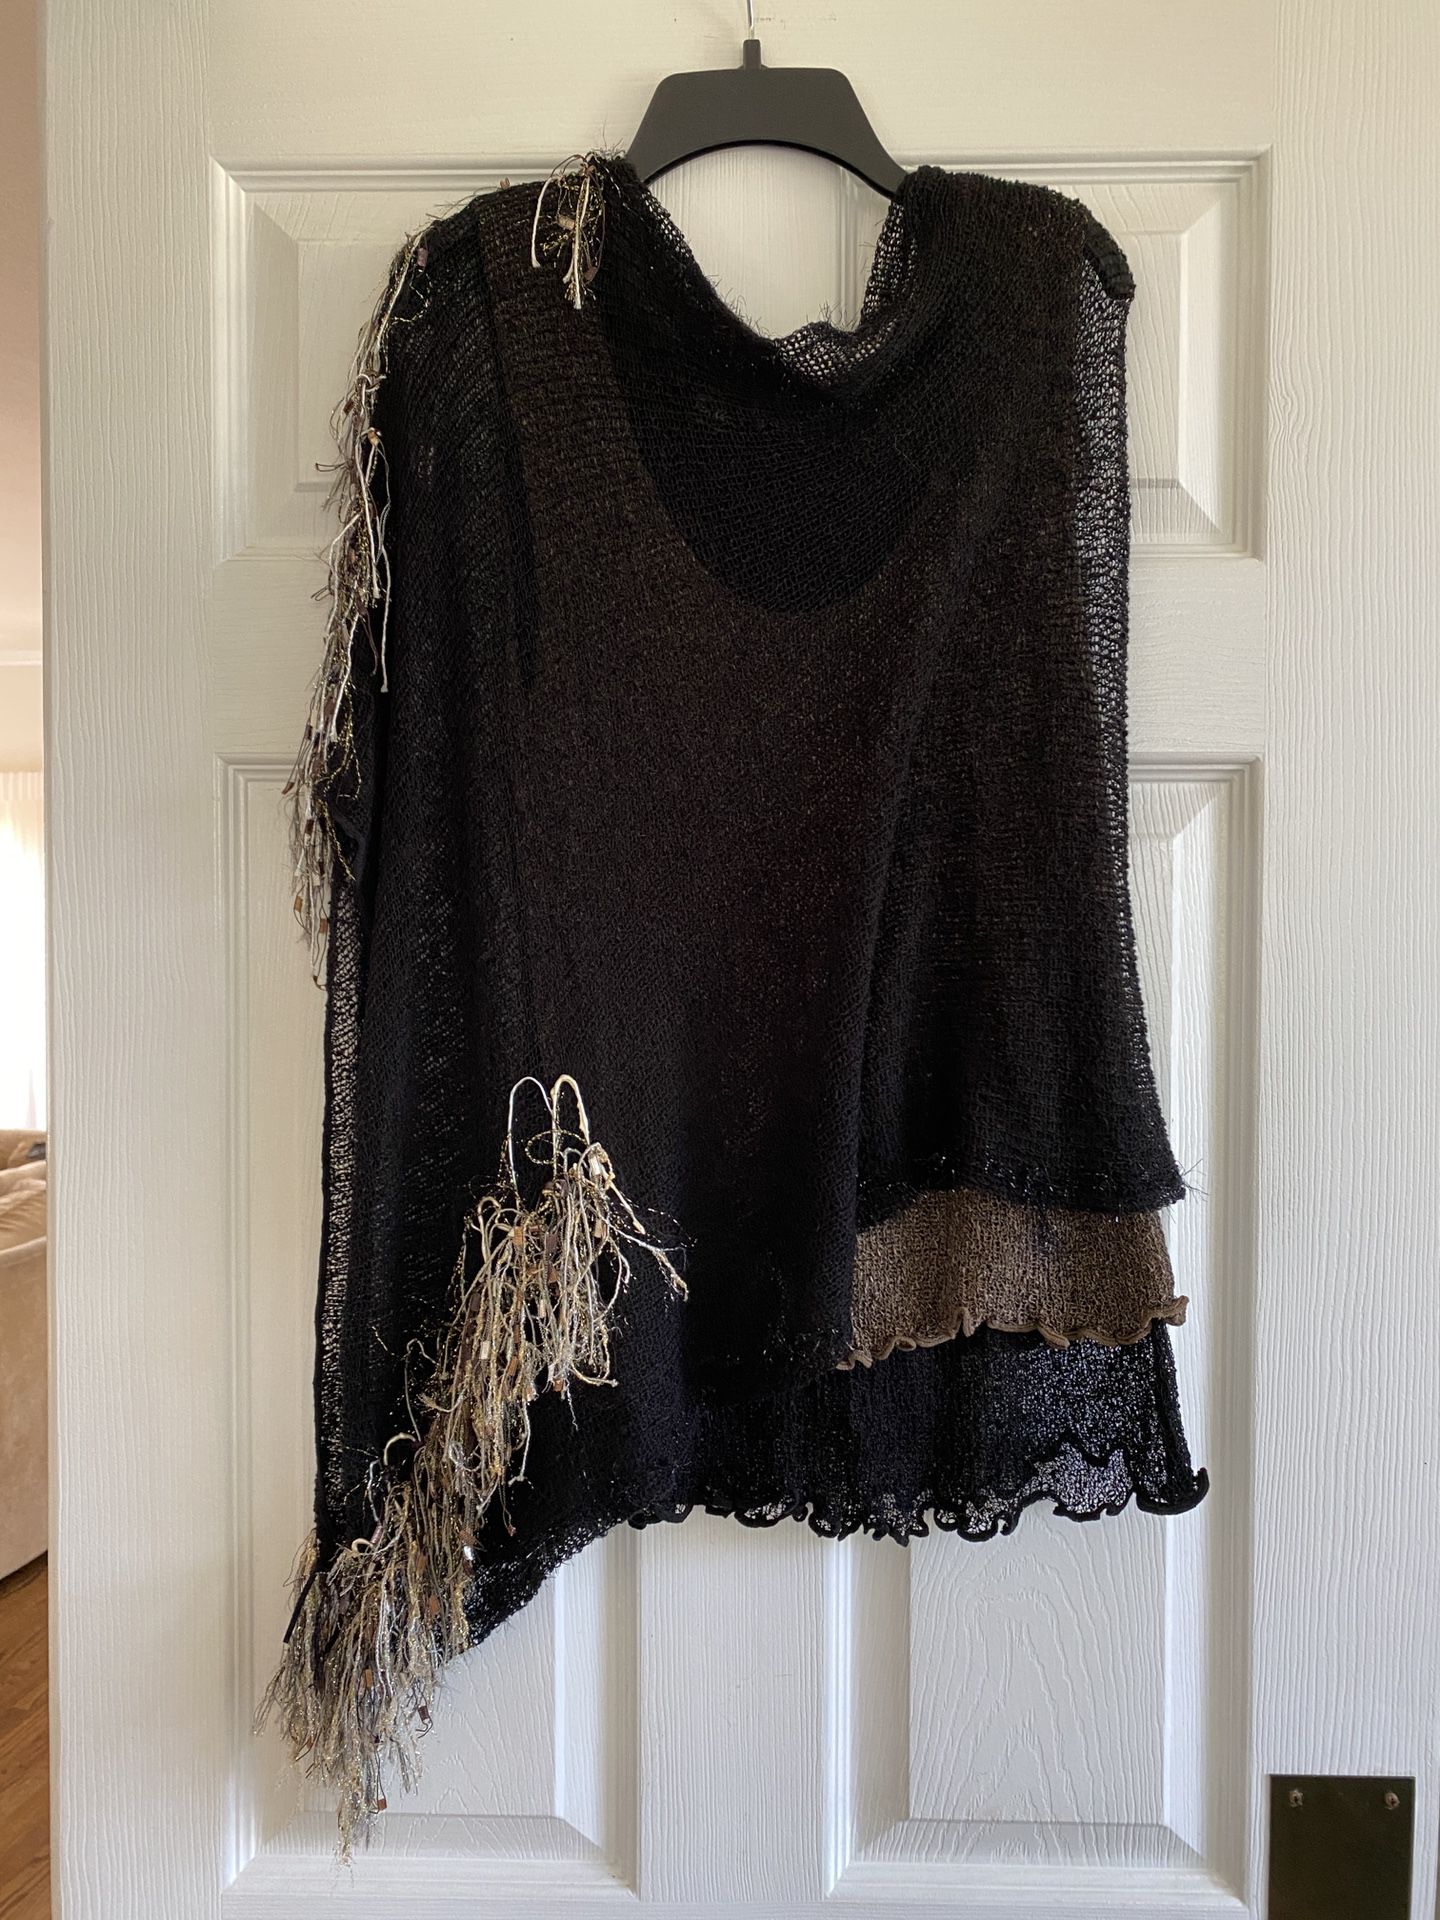 Two piece handmade knit tank-top and poncho set, tank top is reversible to black or taupe. The poncho has embellishments in gold, taupe and white yarn